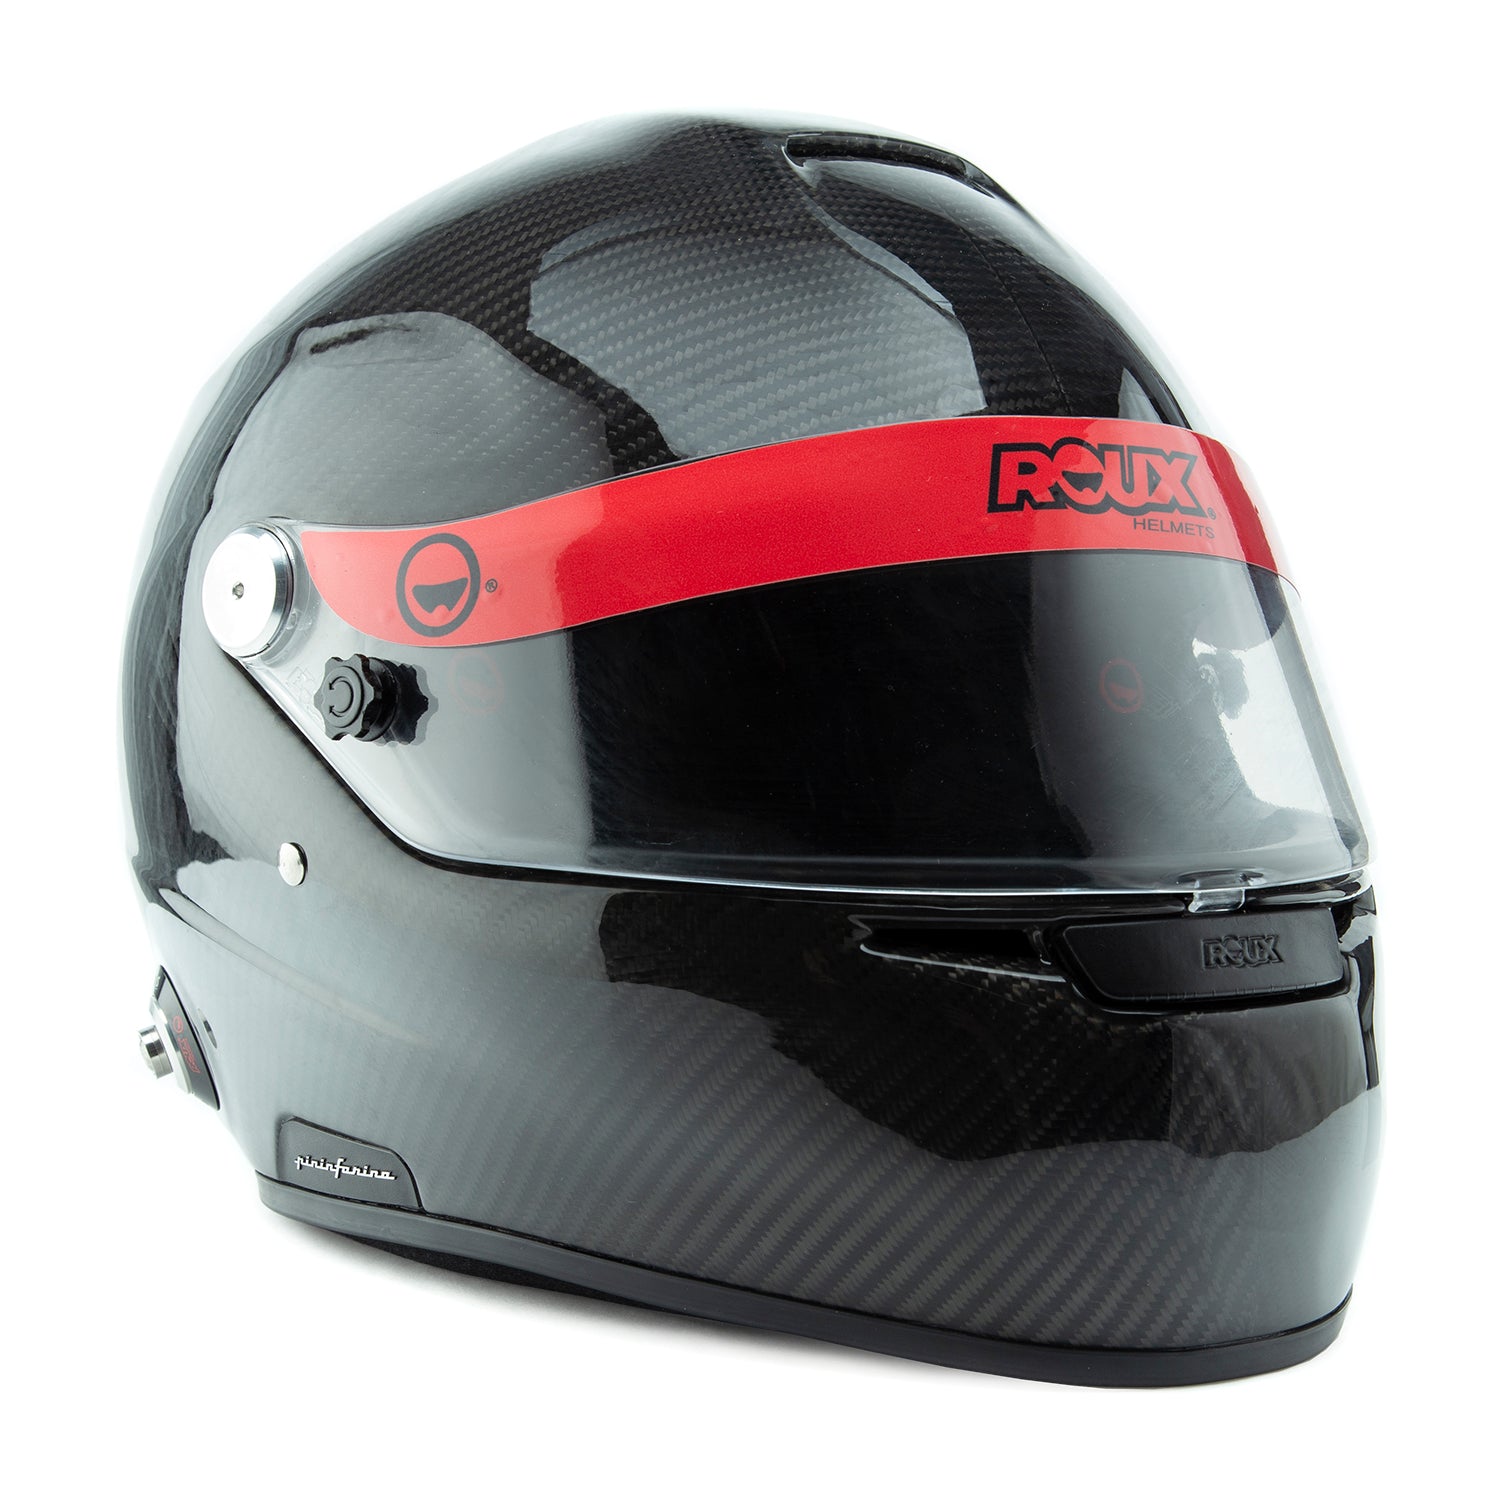 Roux RP-1 Formula Glossy Carbon, FIA 8859 (Size: Small - 2XL)